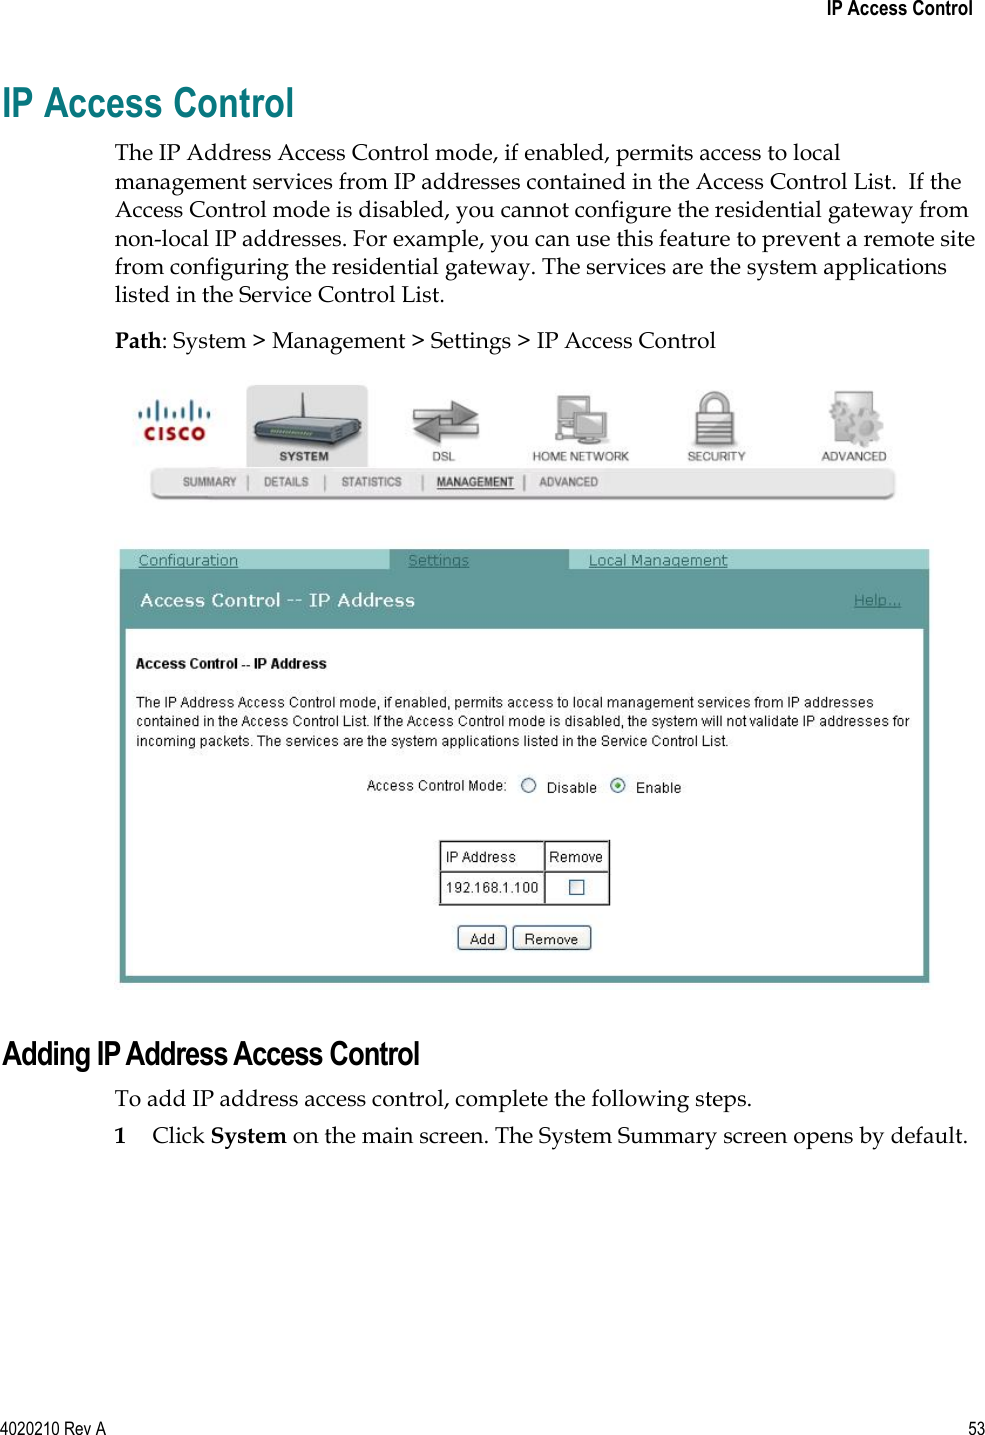   IP Access Control 4020210 Rev A 53  IP Access Control The IP Address Access Control mode, if enabled, permits access to local management services from IP addresses contained in the Access Control List.  If the Access Control mode is disabled, you cannot configure the residential gateway from non-local IP addresses. For example, you can use this feature to prevent a remote site from configuring the residential gateway. The services are the system applications listed in the Service Control List. Path: System &gt; Management &gt; Settings &gt; IP Access Control   Adding IP Address Access Control To add IP address access control, complete the following steps. 1 Click System on the main screen. The System Summary screen opens by default. 